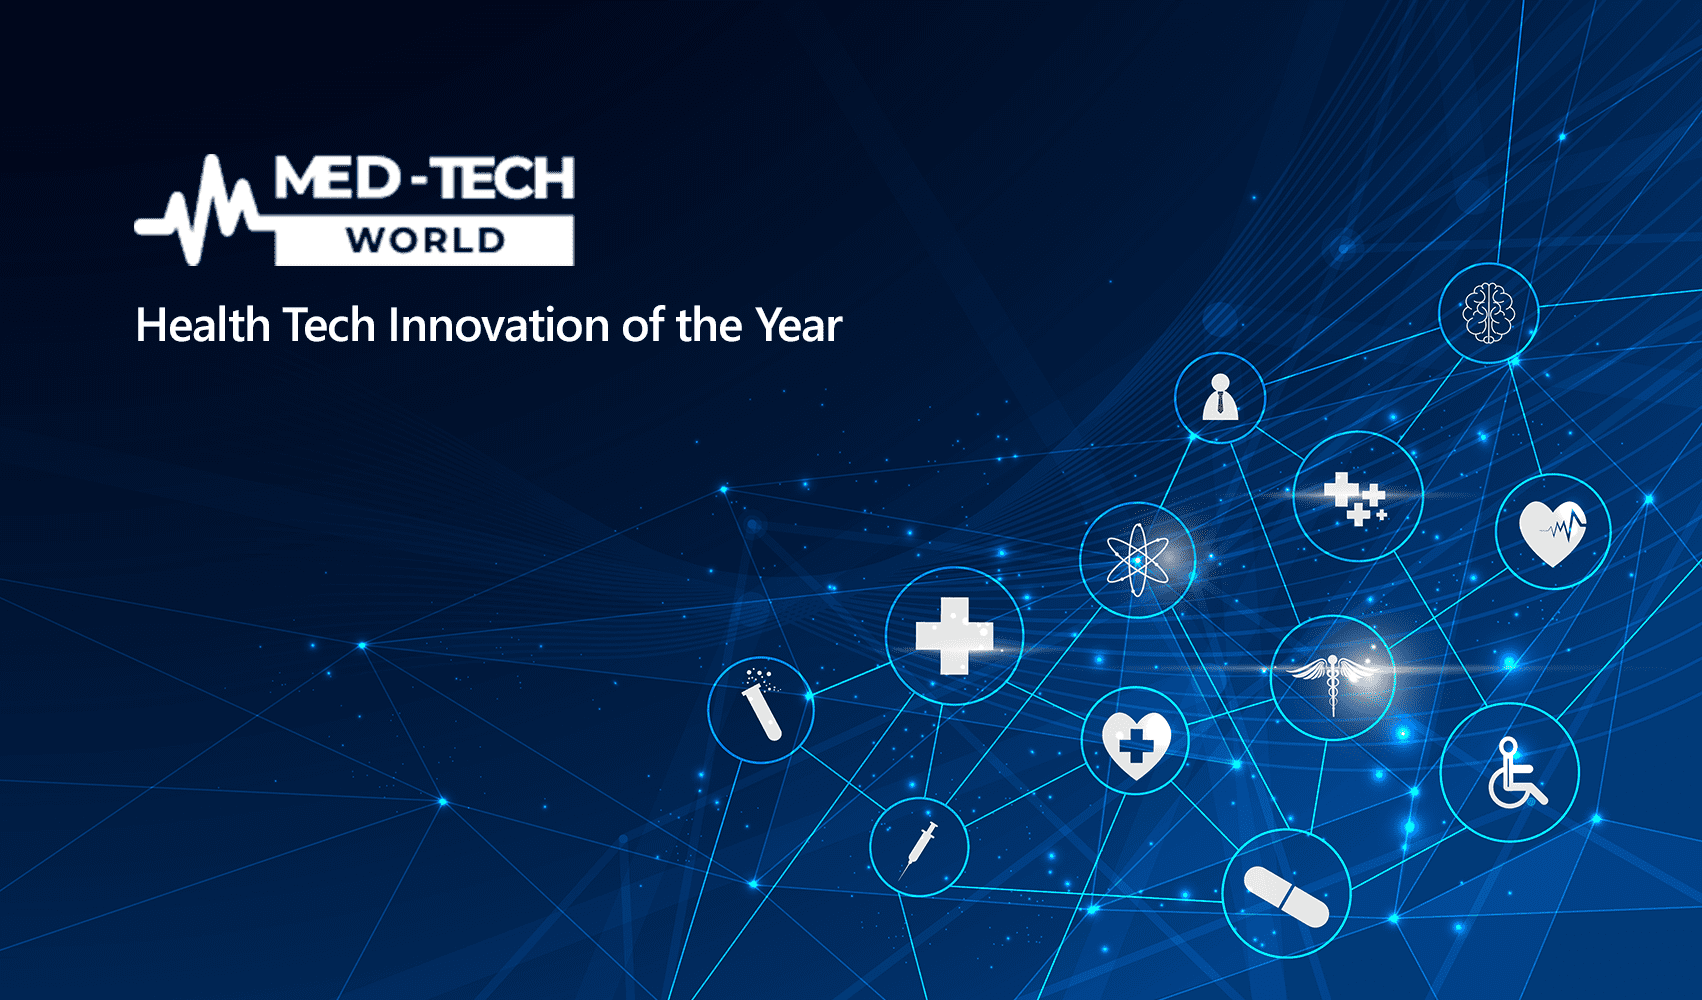 Exigy nomination for Med-Tech Award for Health Tech Innovation of the Year